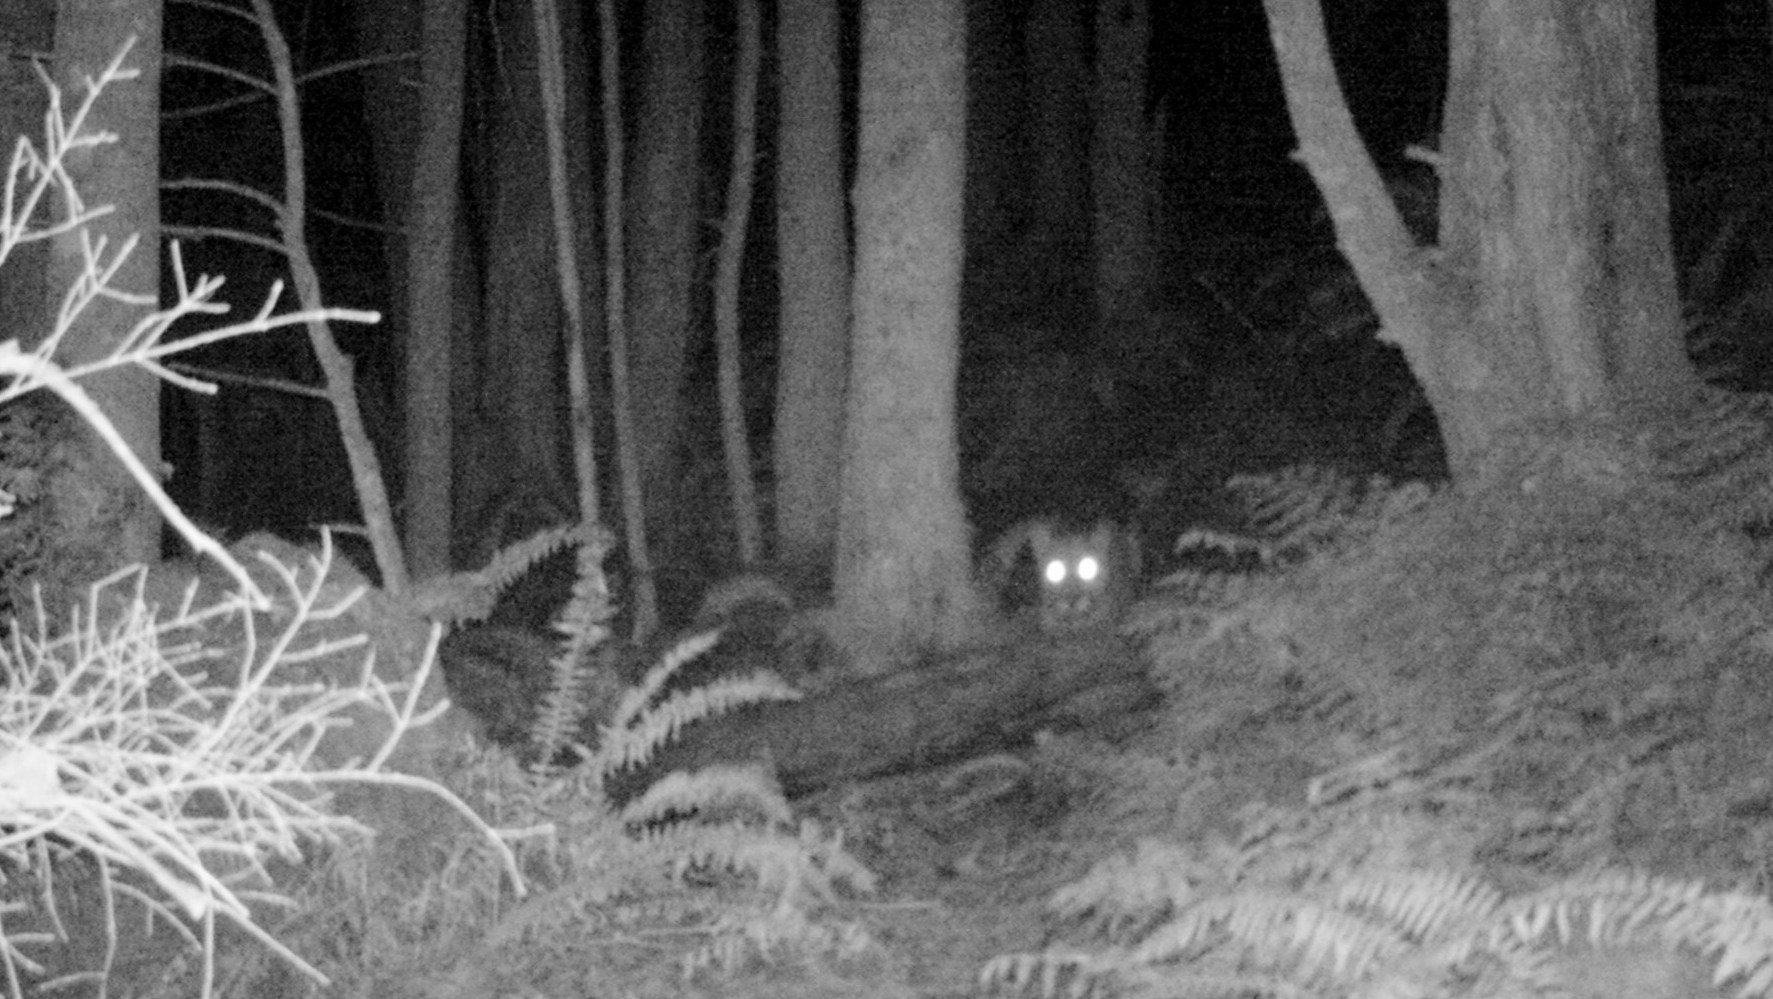 EK000028 001 Why Animals Eyes Glow at Night & Stalked by a Cougar Story